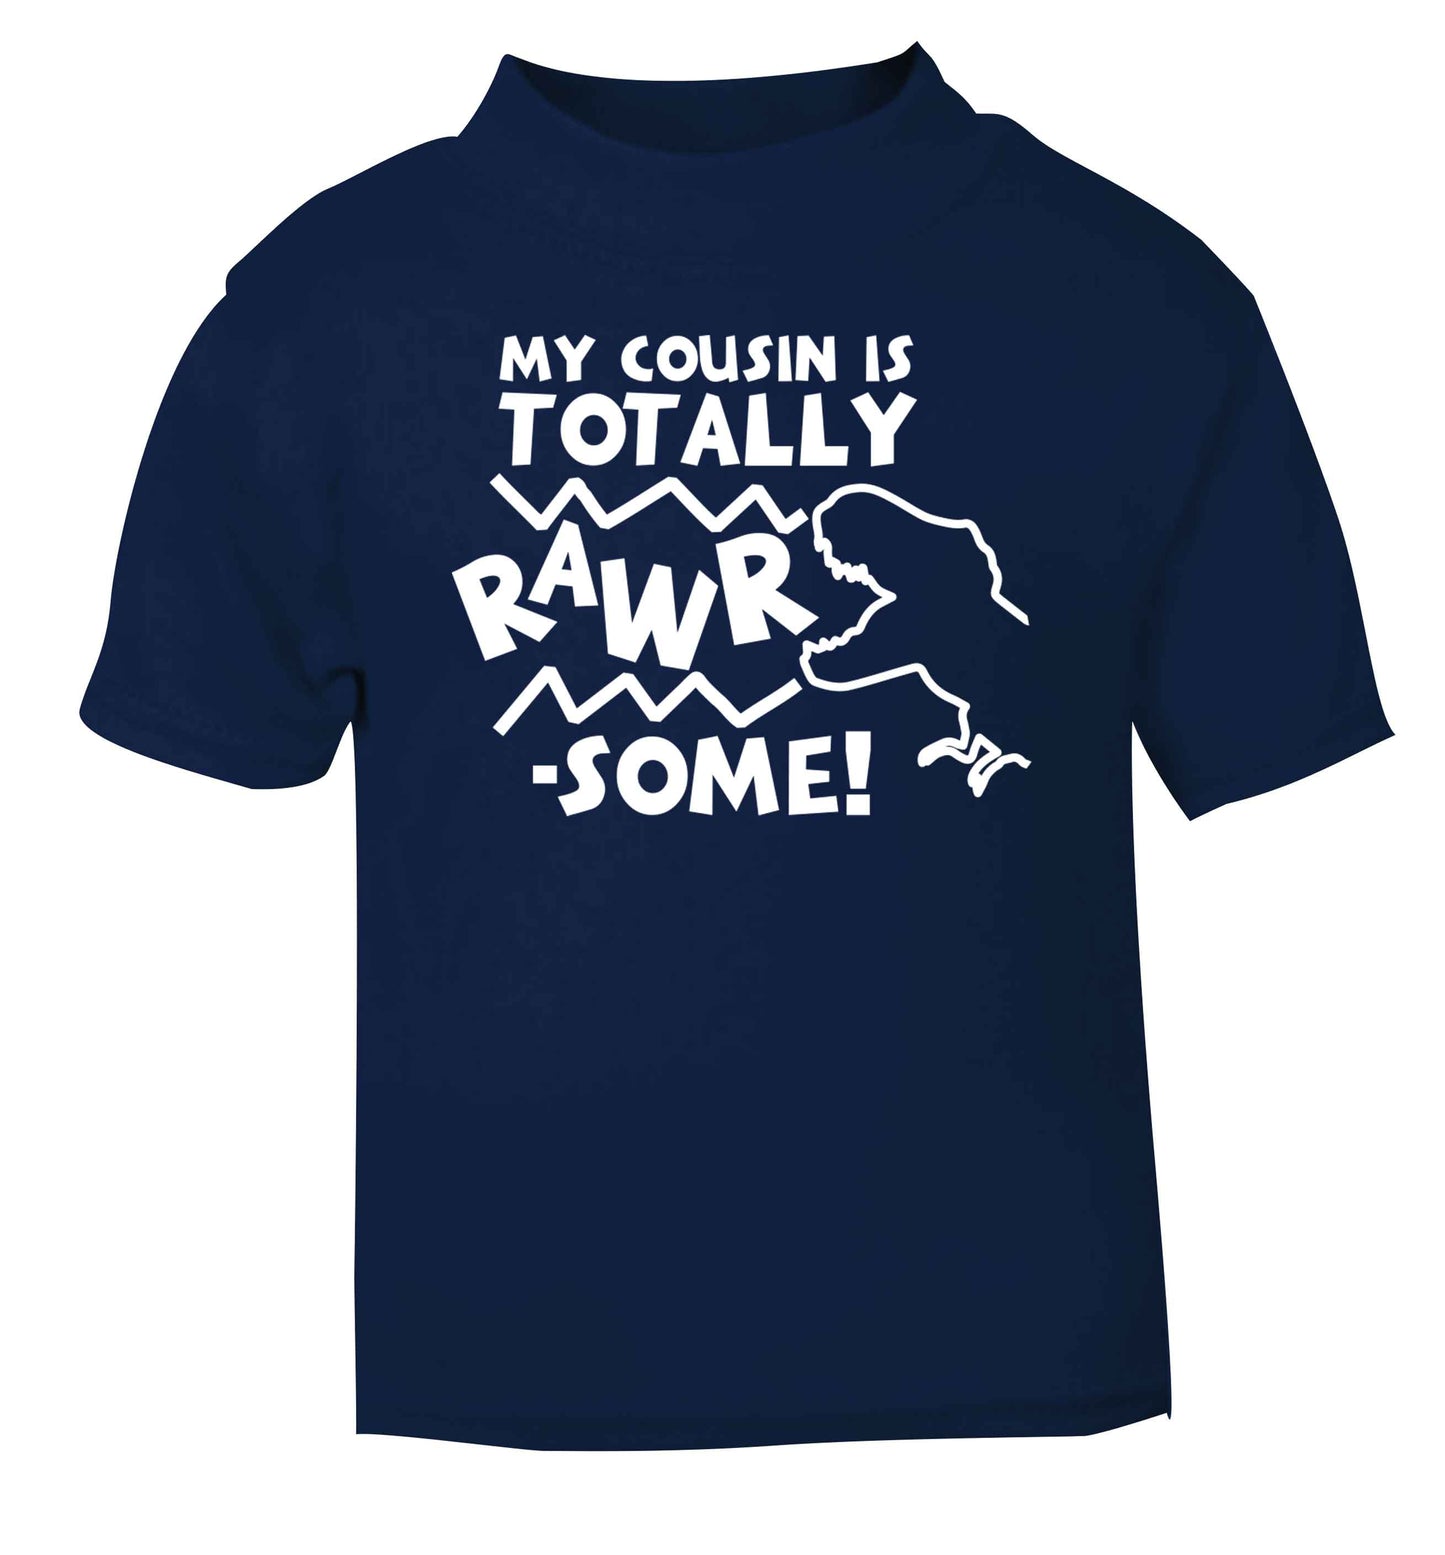 My cousin is totally rawrsome navy baby toddler Tshirt 2 Years